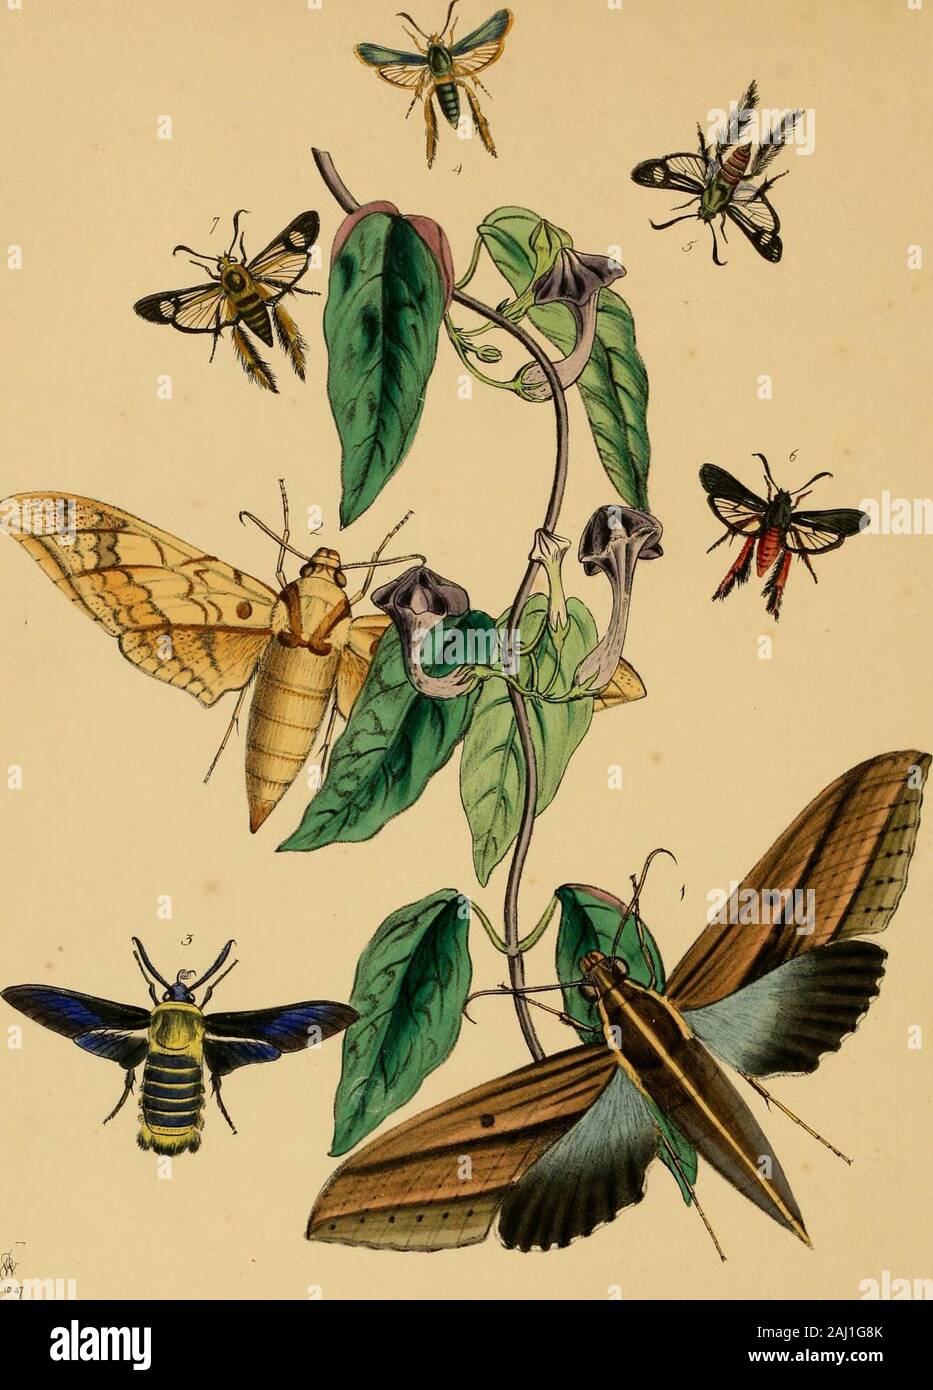 The cabinet of oriental entomology : being a selection of some of the rarer and more beautiful species of insects, natives of India and the adjacent islands, the greater portion of which are now for the first time discribed and figured . inch. Inhabits Assam. Communicated by Major F. Jenkins. FIGURE 9.SAPERDA (s—G. Nov.) BICOLOR. Westw. Saperda ? nigra, pronoto elytrisque coccineis, illo nigro-bimaculato, capite subrostrato, anteimis brevibus crassisarticulis 5 et reliquis serratis, pronoto conico truncato, lateribus inennibus ; elytris convexis apice rotundatis,pedibus bre%ibus simplicibus. S Stock Photo